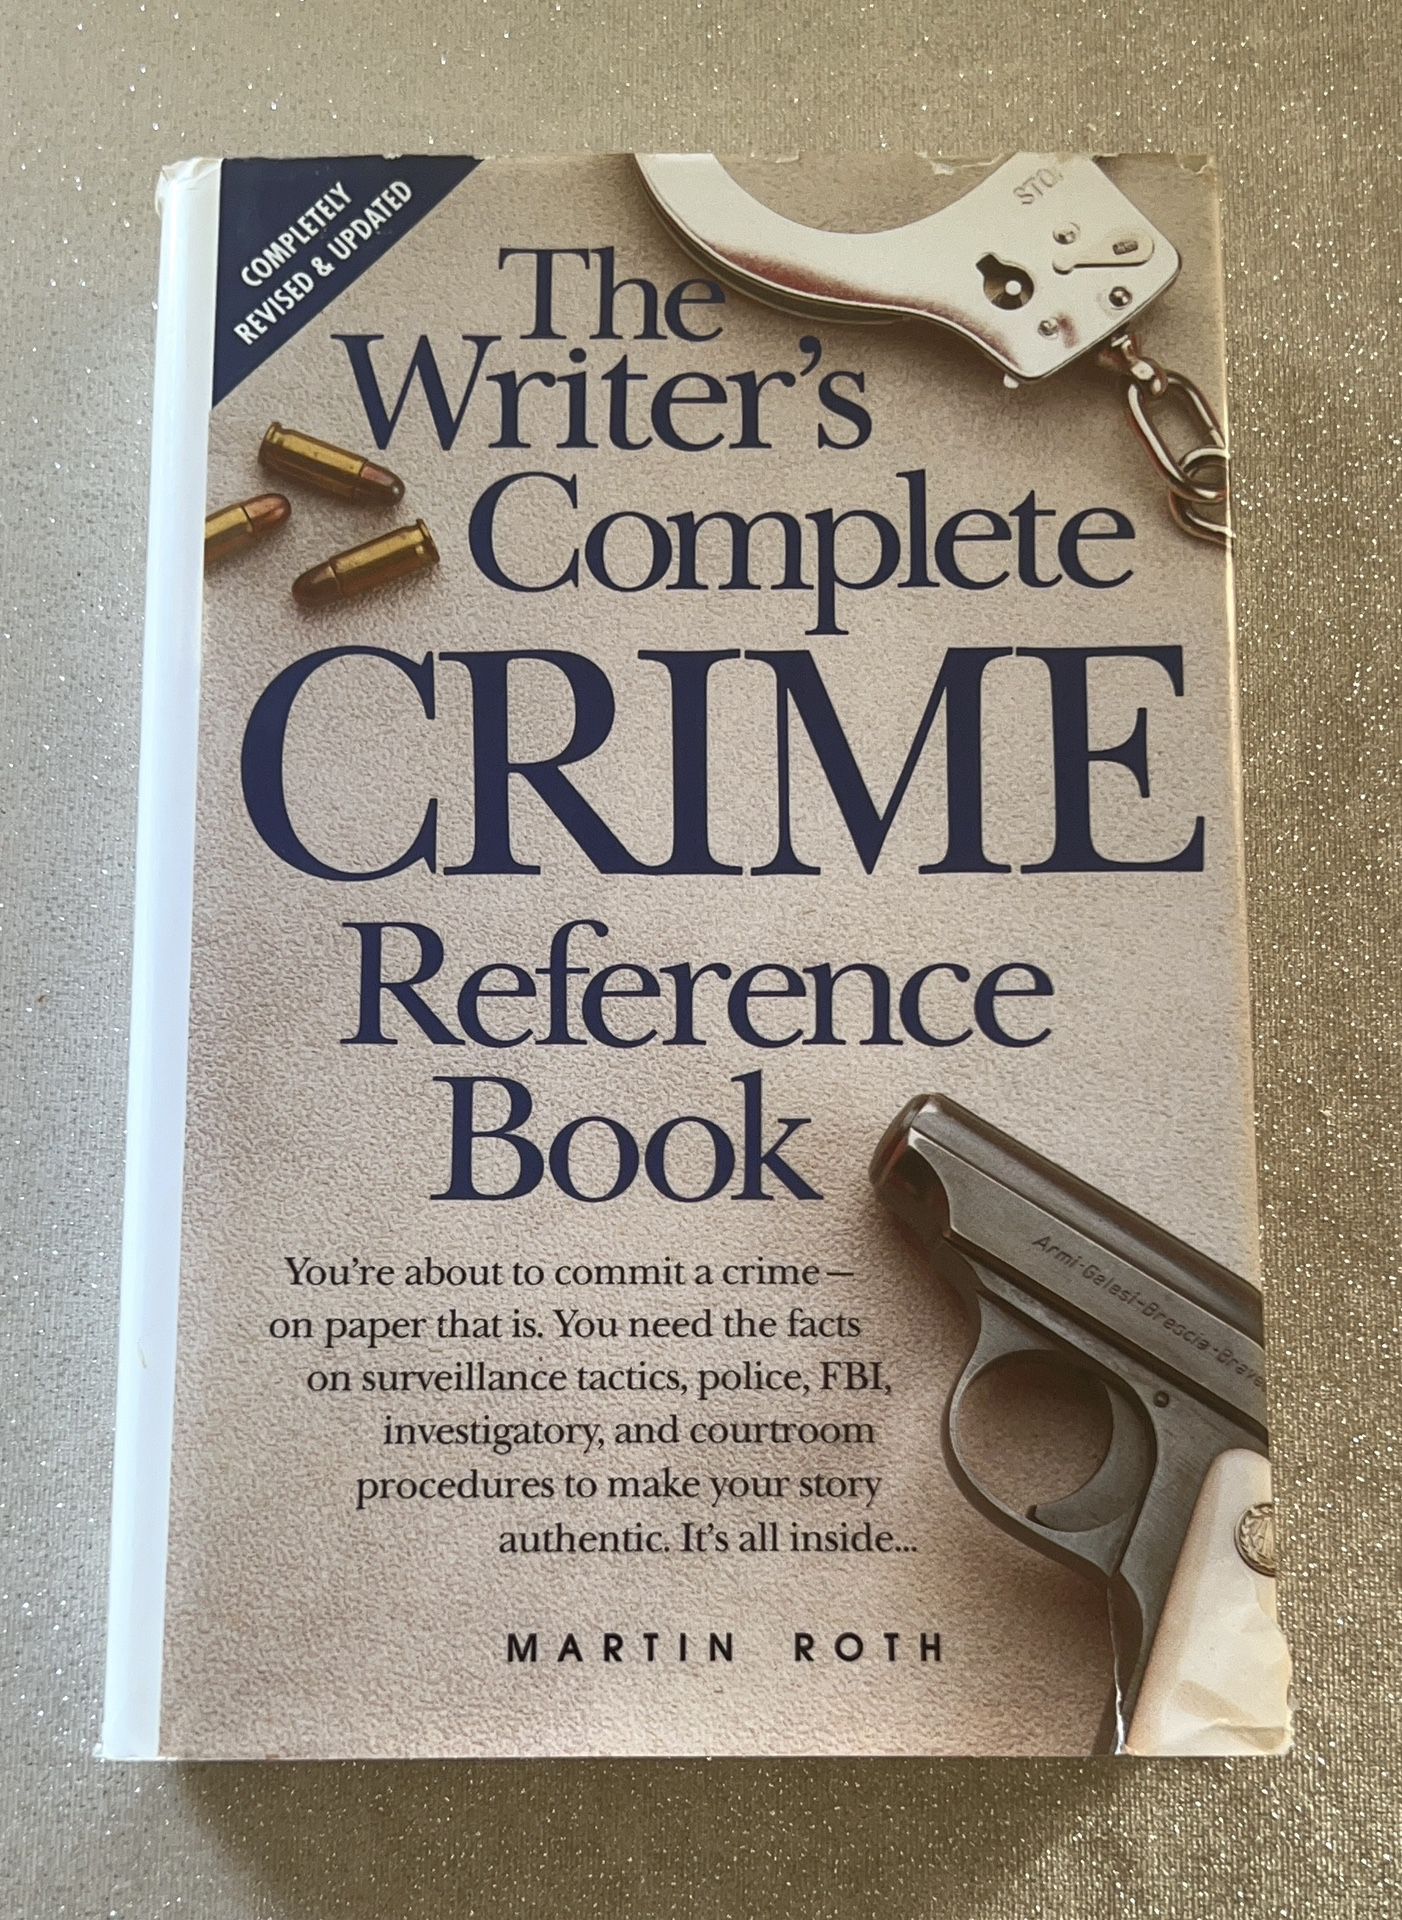 The Writers Complete Crime Reference Book by Martin Roth